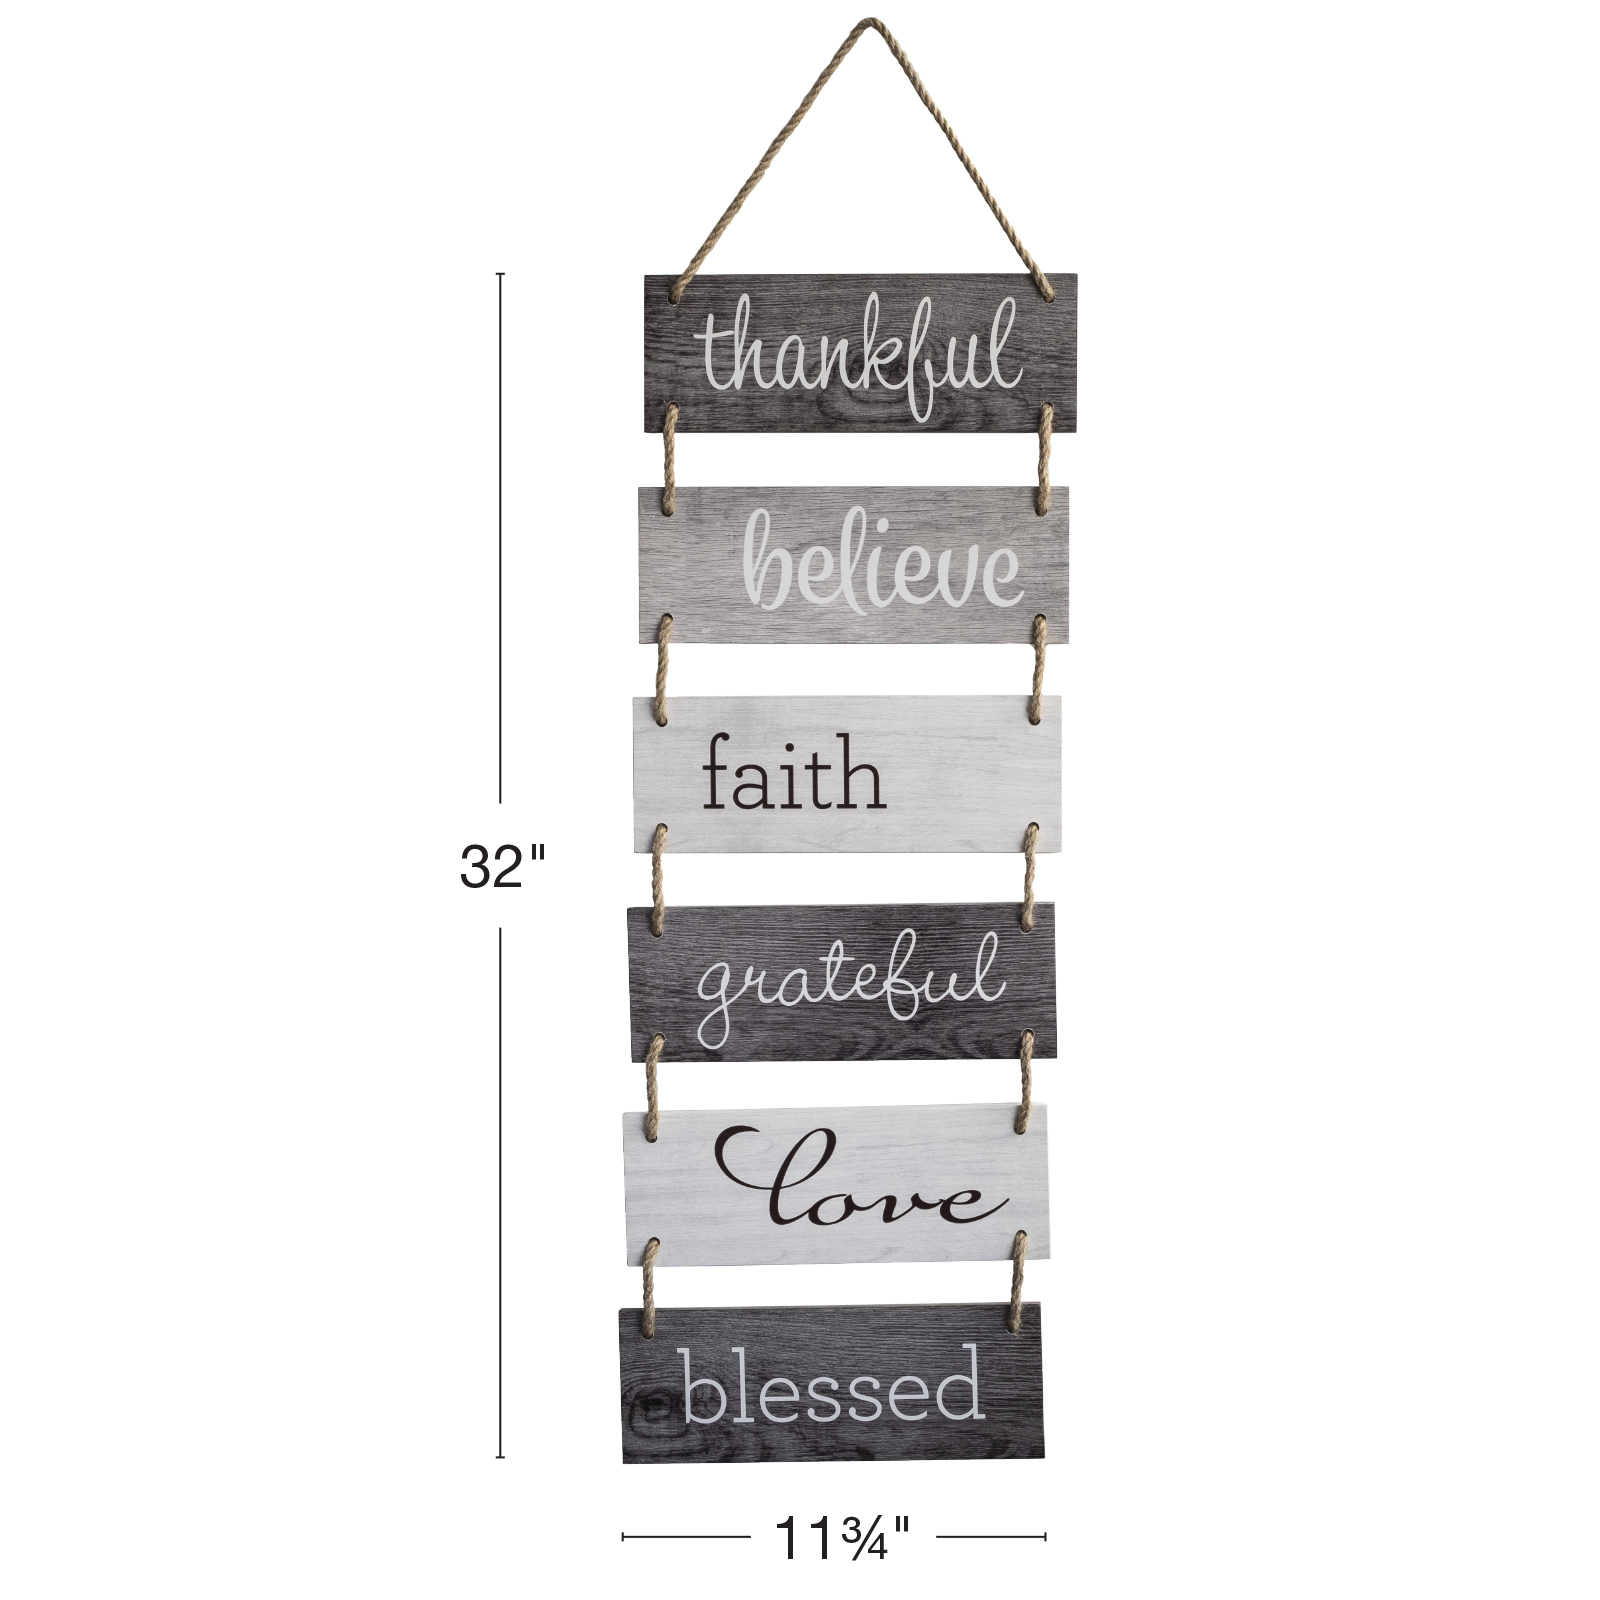 Thankful Large Version Wooden Sign